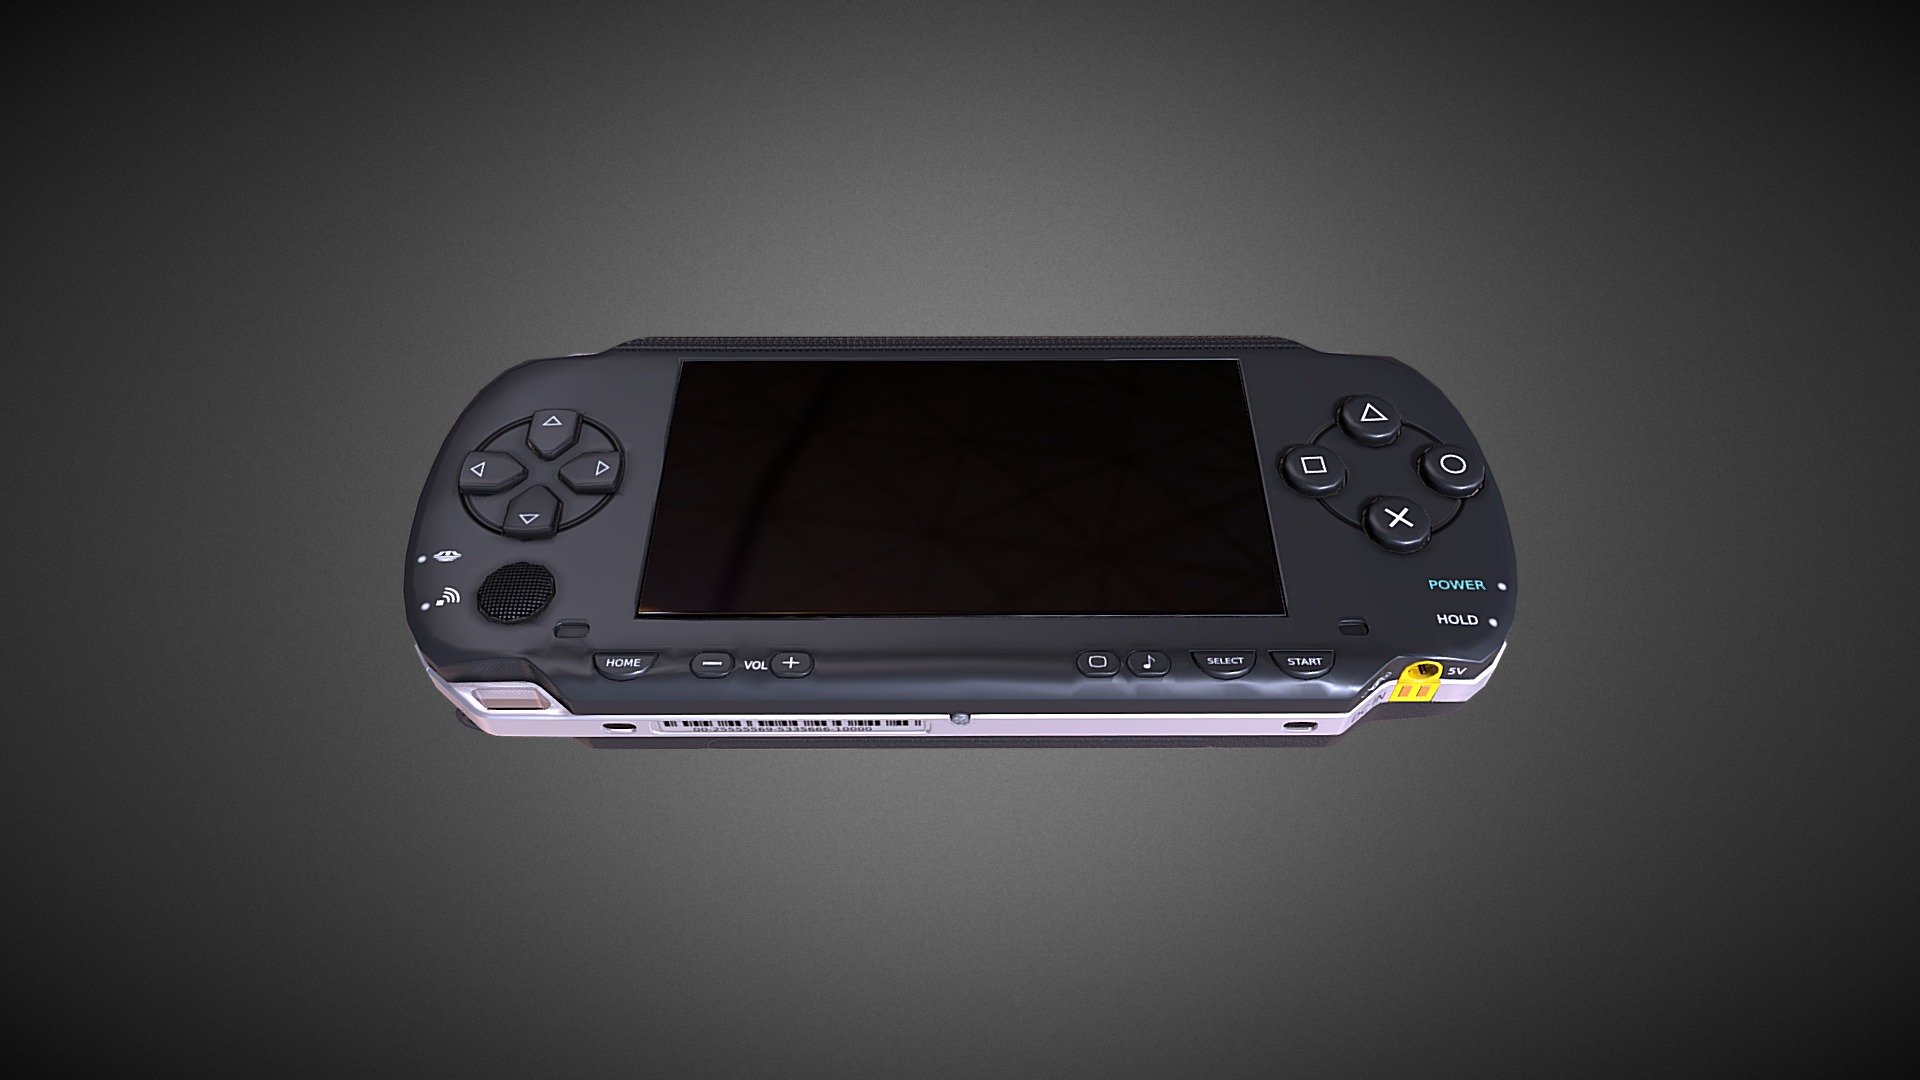 Sony PSP contains low poly 3D models of Gaming Console with High Quality textures to fill up your game environment. The assets are VR-Ready and game ready.

Total Polygons - 12792

Total Tris - 25142

These models are delivered without any brandings or logos attached. The End users/Buyers are solely responsible for ensuring compliance with any branding or trademark requirements applicable to their specific projects.

For Unity3d (Built-in, URP, HDRP) Ready Assets visit our Unity Asset Store Page

Enjoy and please rate the asset!

Contact us on for AR/VR related queries and development support

Gmail - designer@devdensolutions.com

Website

Instagram

Facebook

Linkedin

Youtube

Buy Pizza - Sony PSP - Buy Royalty Free 3D model by Devden 3d model